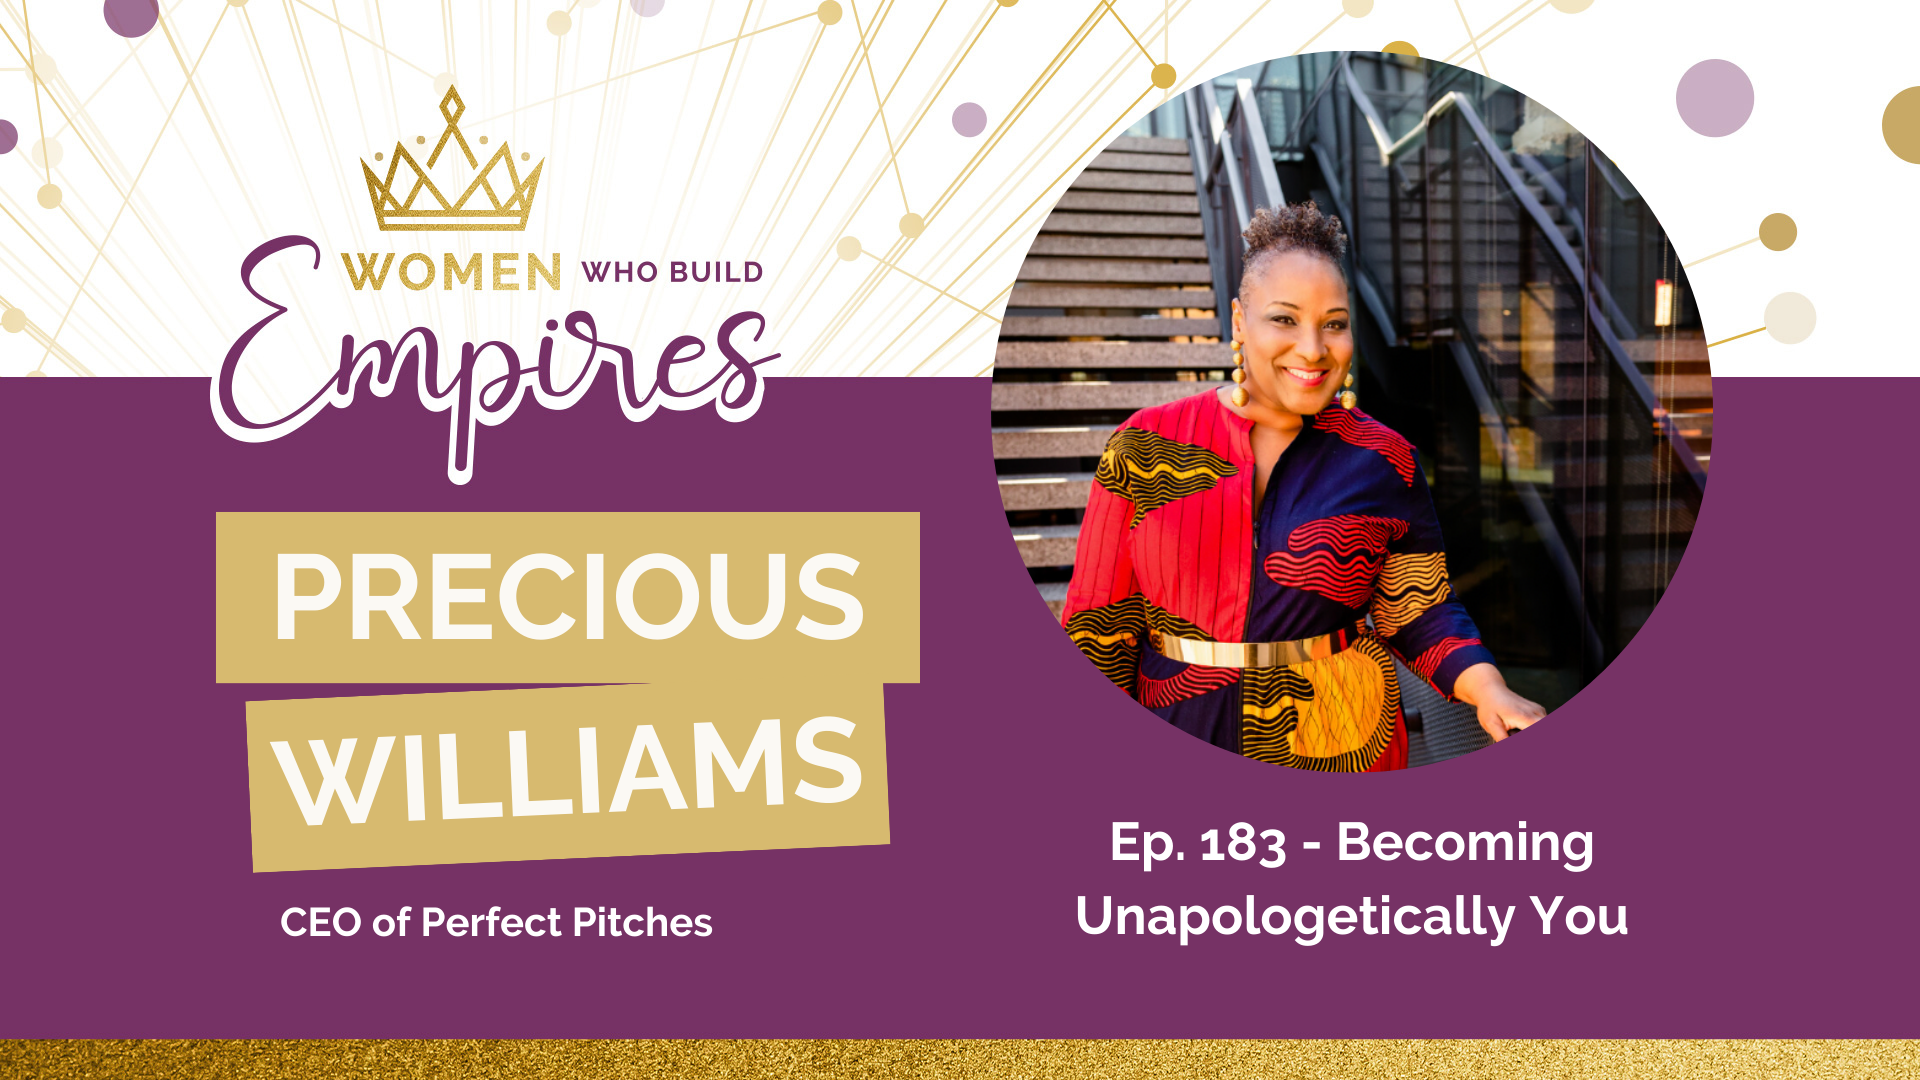 Ep. 183 Precious Williams: Becoming Unapologetically You